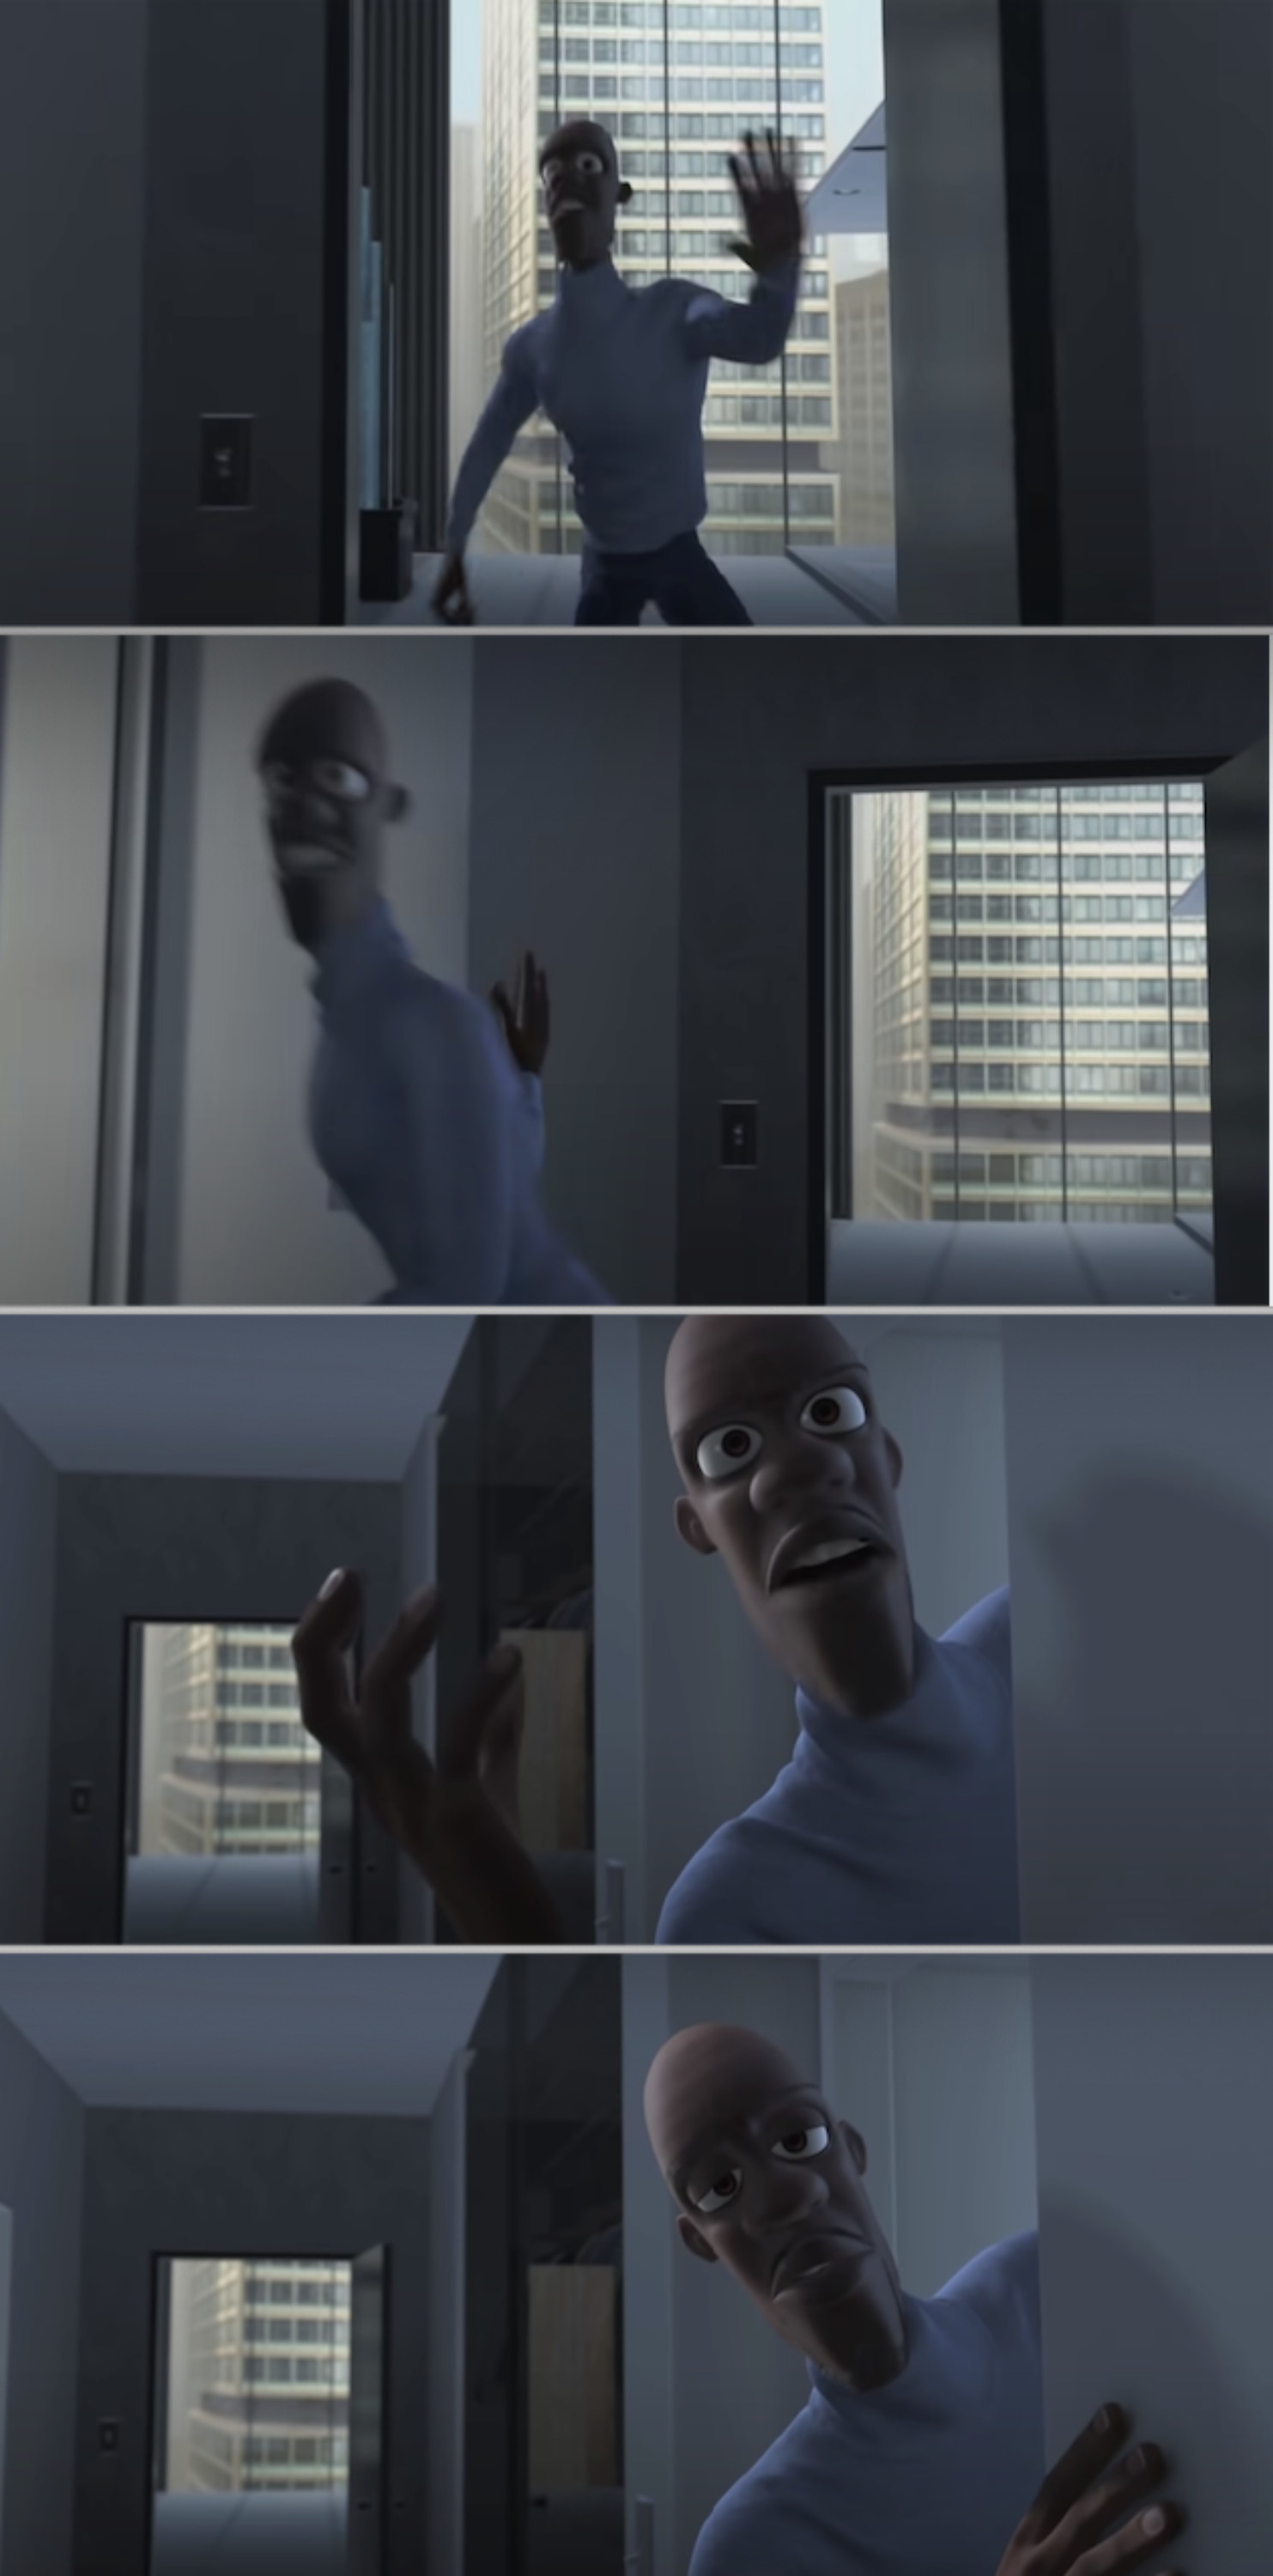 Frozone talking to his wife in his apartment